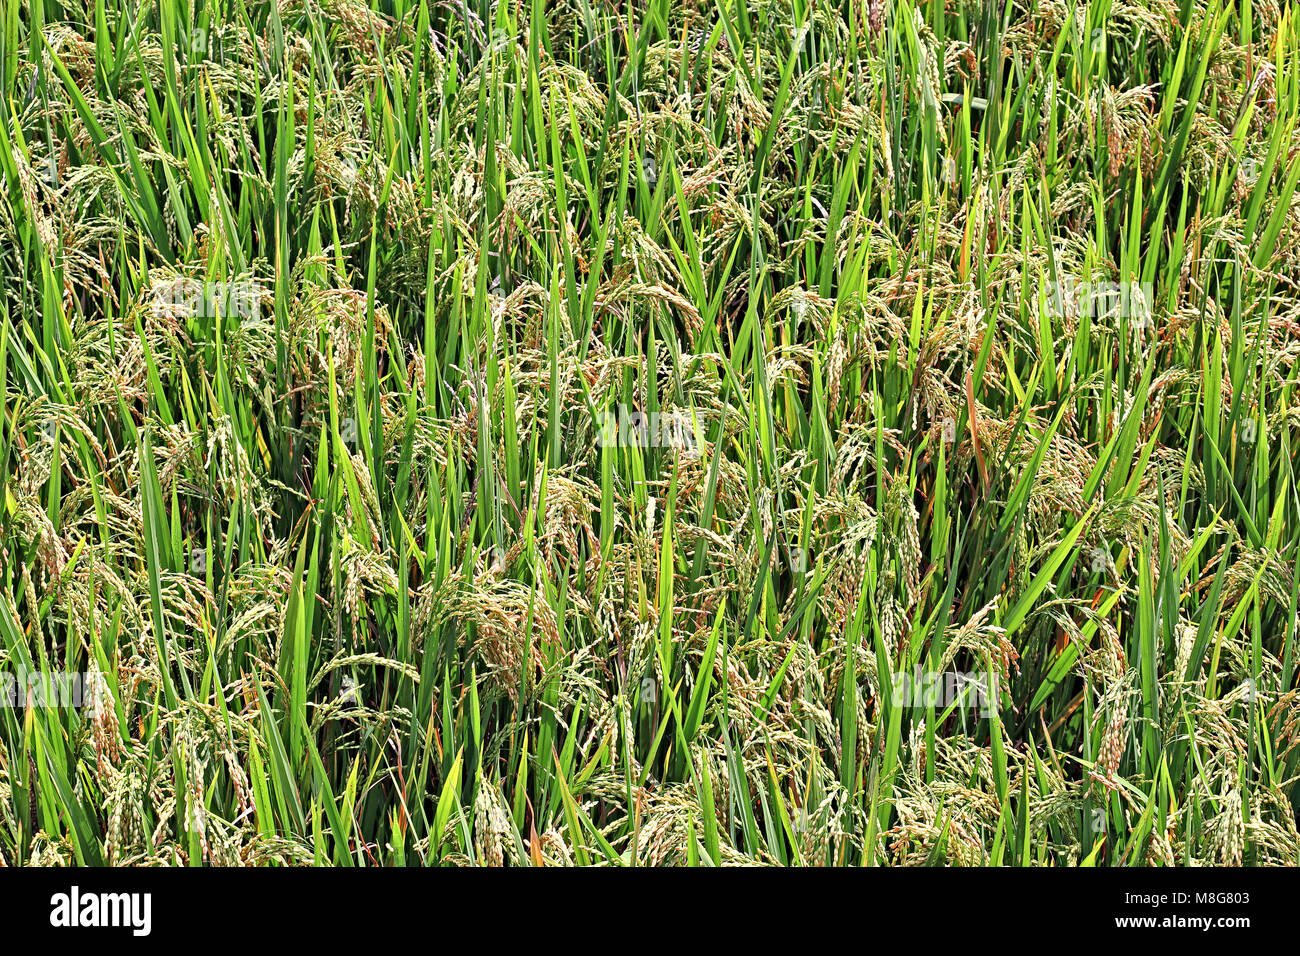 Ripening rice paddy plants growing in field in Kerala, India Stock Photo